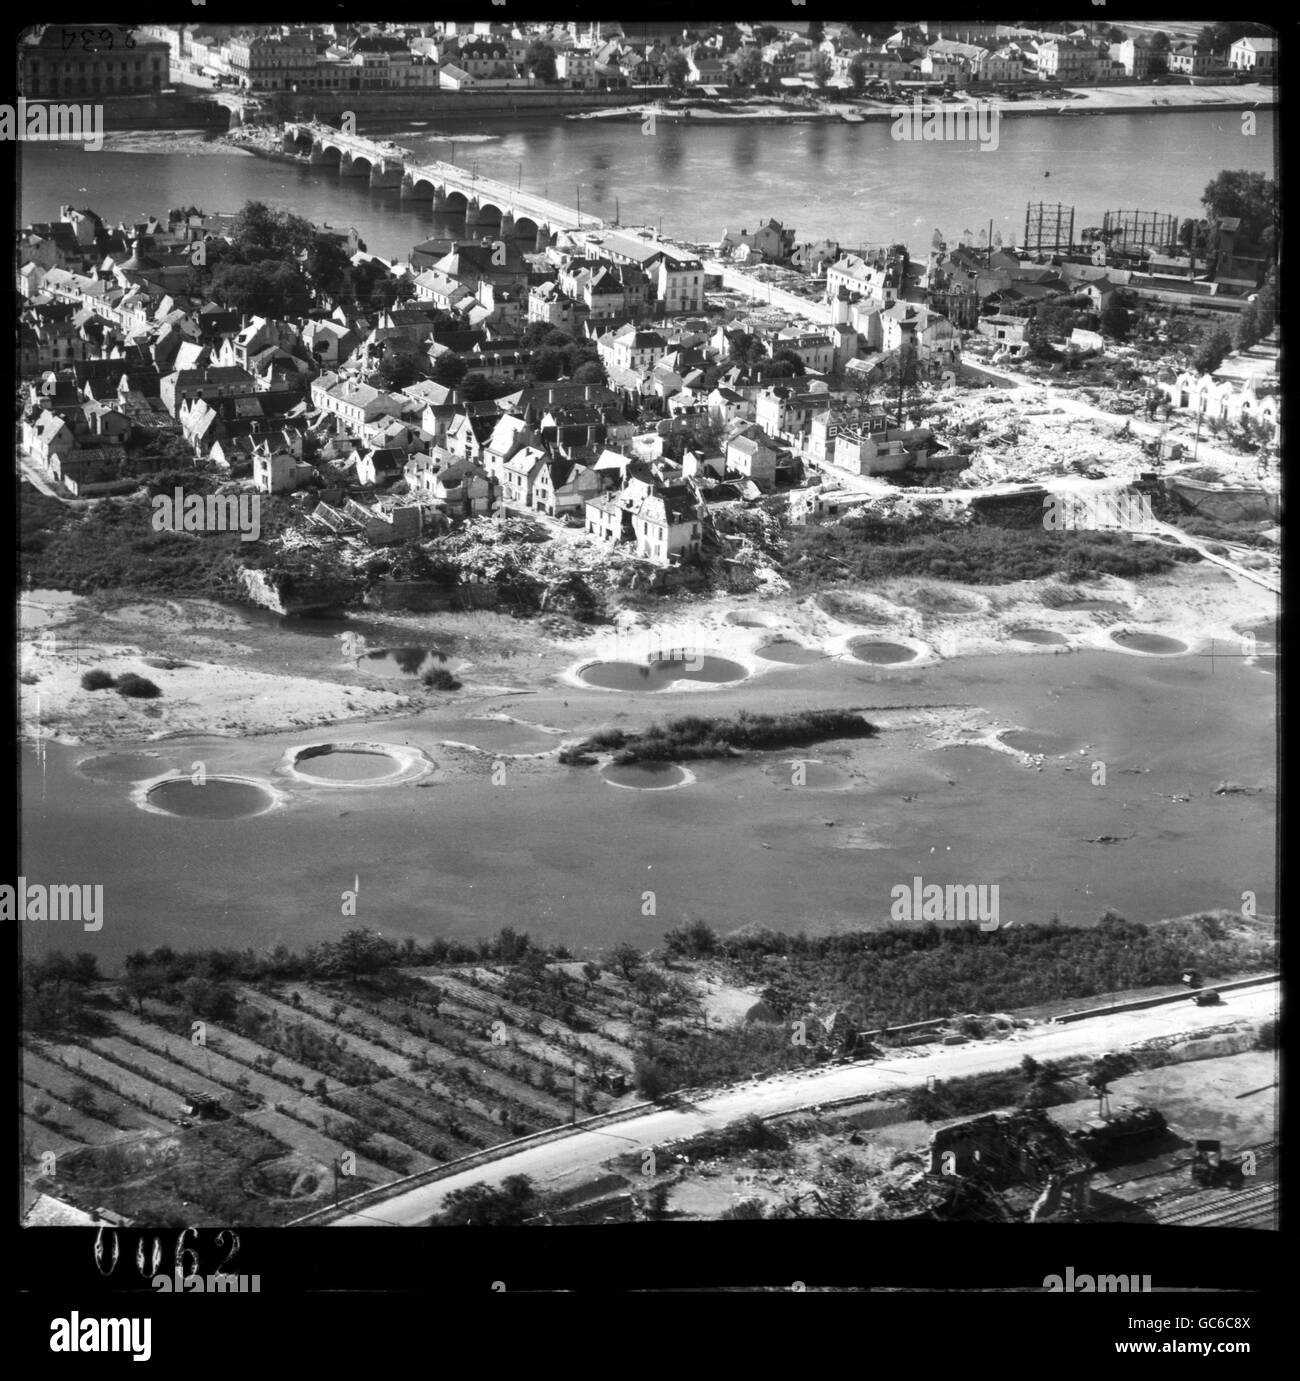 EDITORIAL USE ONLY - MANDATORY CREDIT CROWN COPYRIGHT/RCAHMS Saumur, Maine-et-Loire, France in an oblique reconnaissance photograph taken by the Royal Air Force on 2 October 1944. The picture is from The Aerial reconnaissance Archive (TARA) whose custodian is the Royal Commission on the Ancient and Historical Monuments of Scotland (RCAHMS) and which from this Monday, be available on-line to the public. Stock Photo